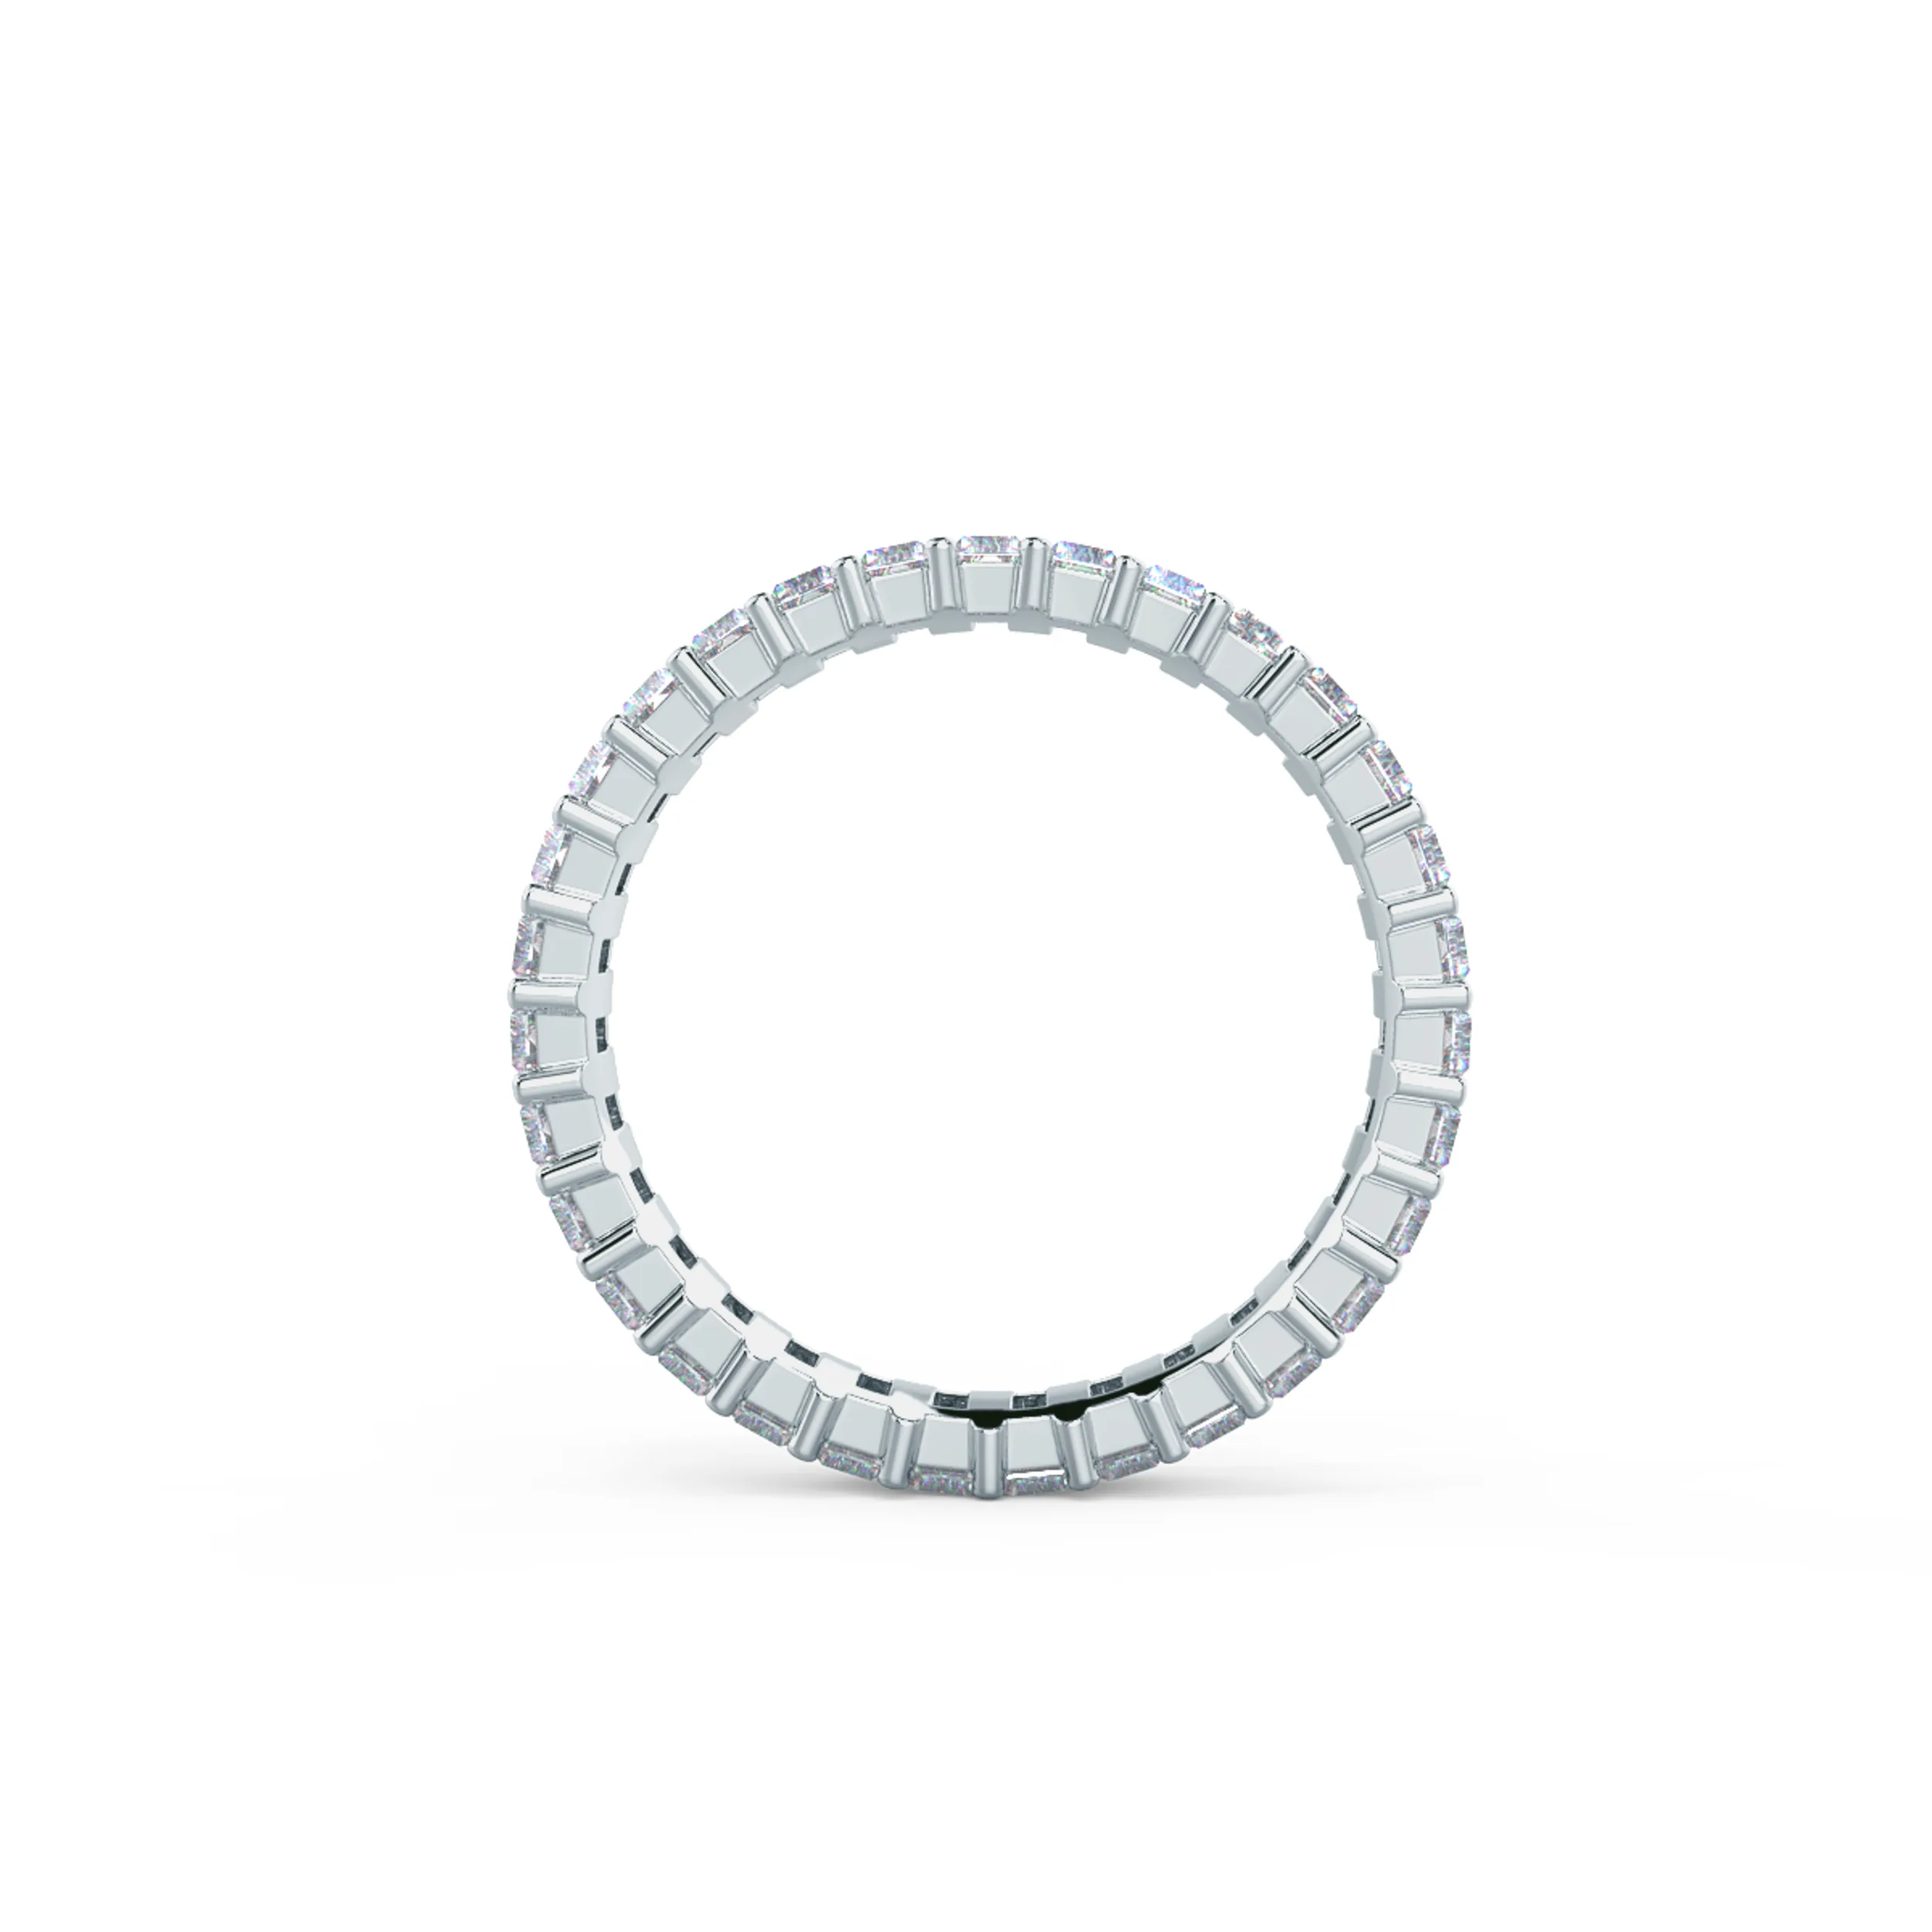 2.8 Carat Lab Diamonds set in White Gold Baguette Eternity Band (Profile View)